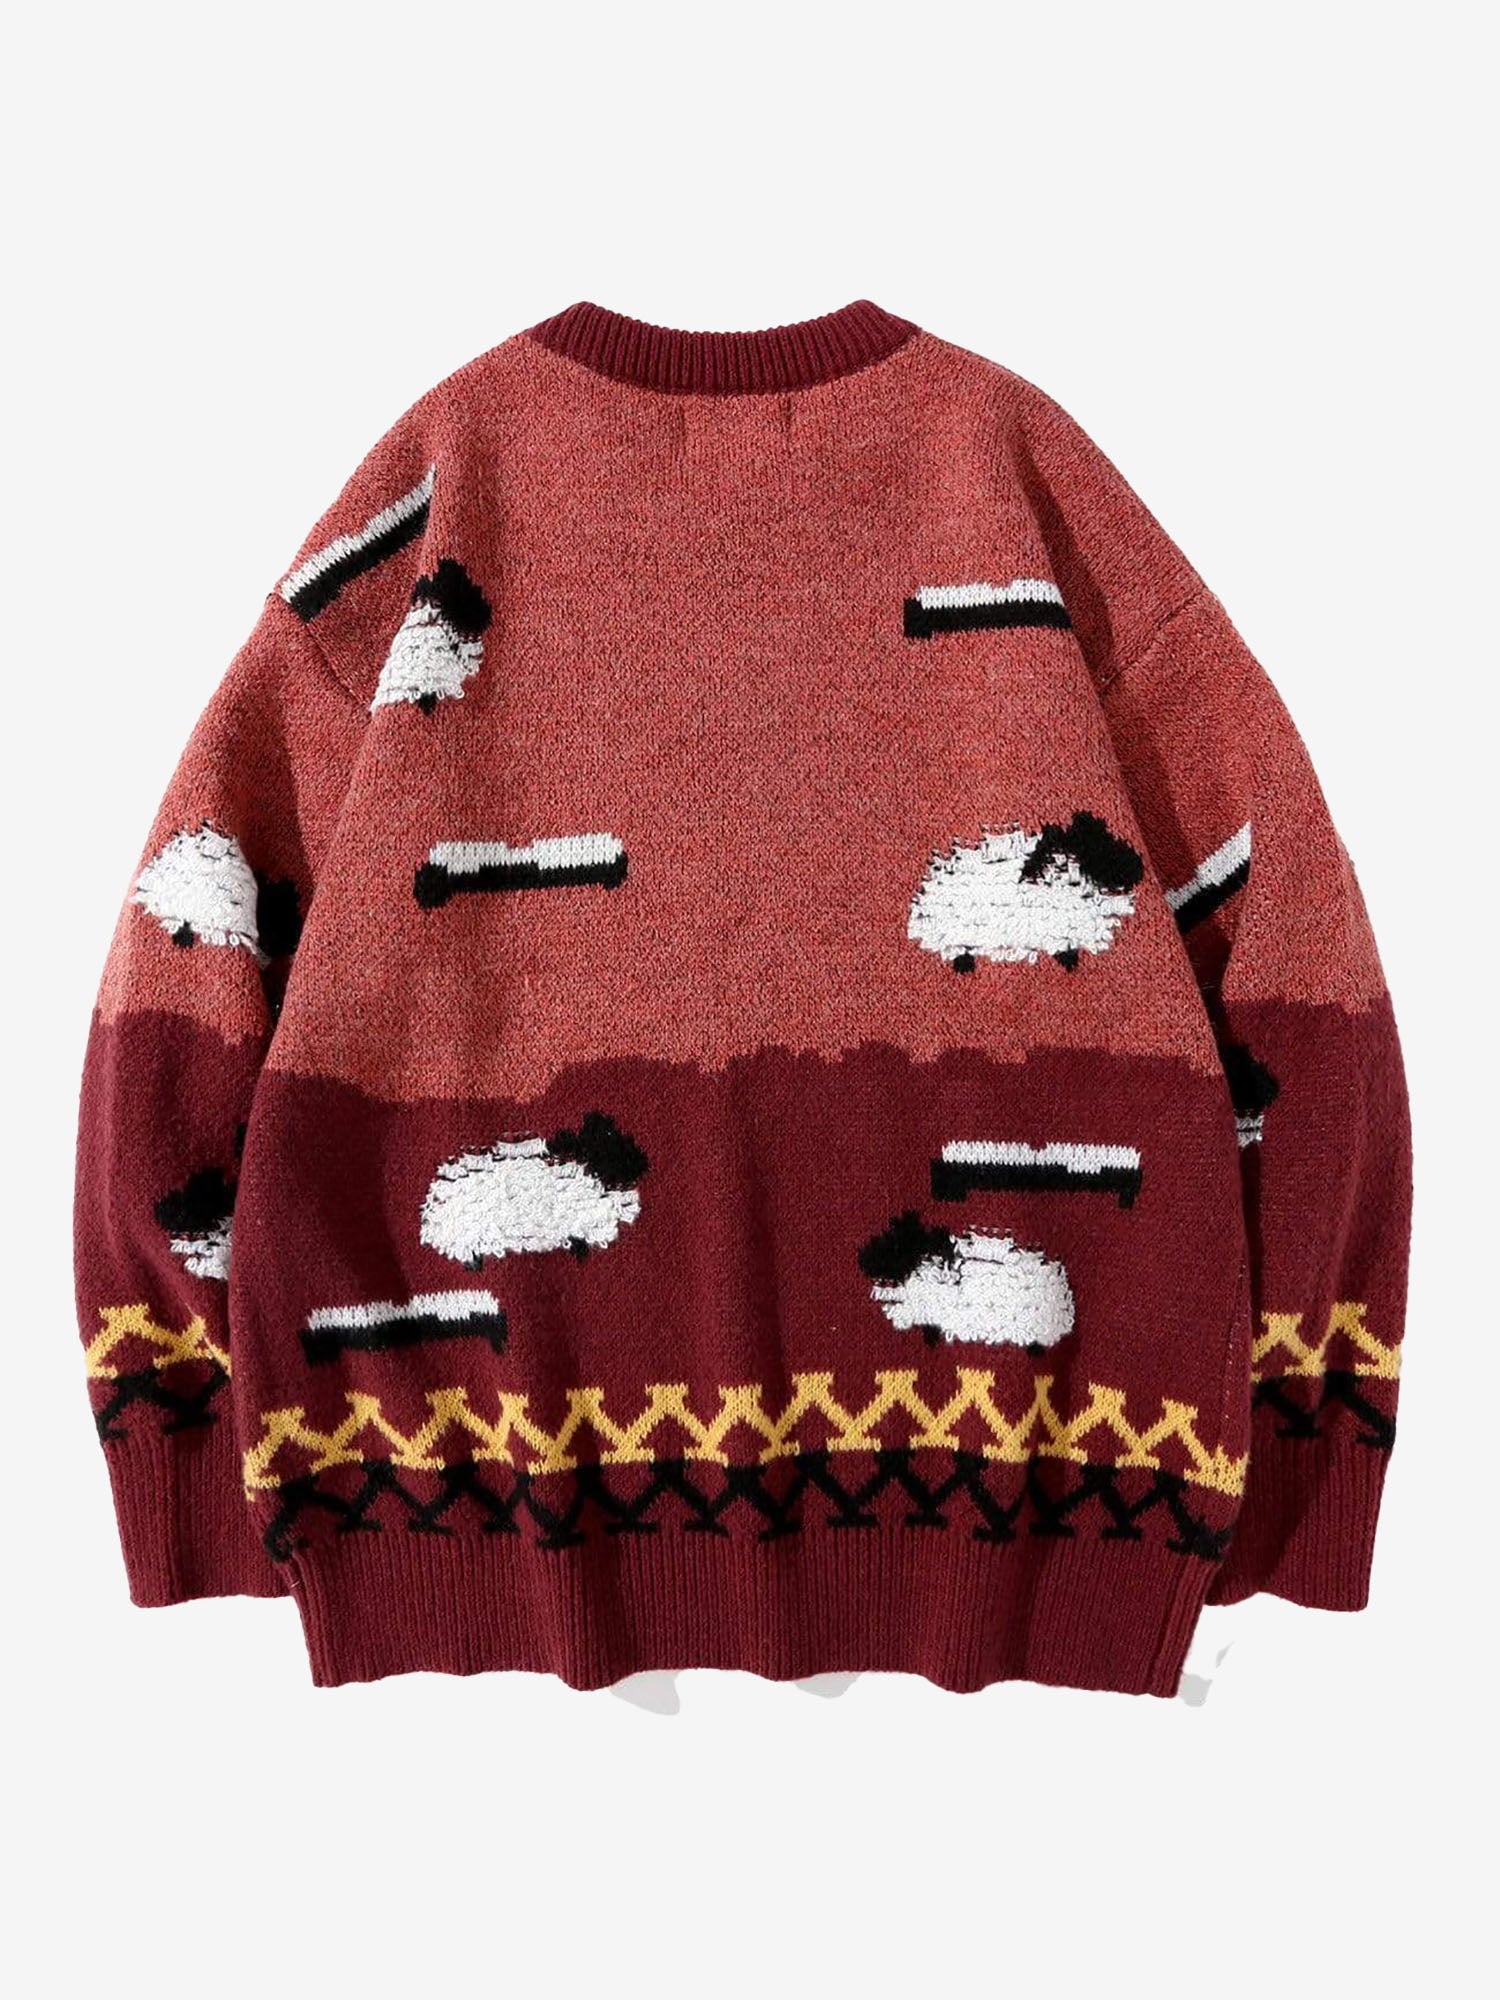 JUSTNOTAG Vintage Fence Love Sheep Knitted Sweater